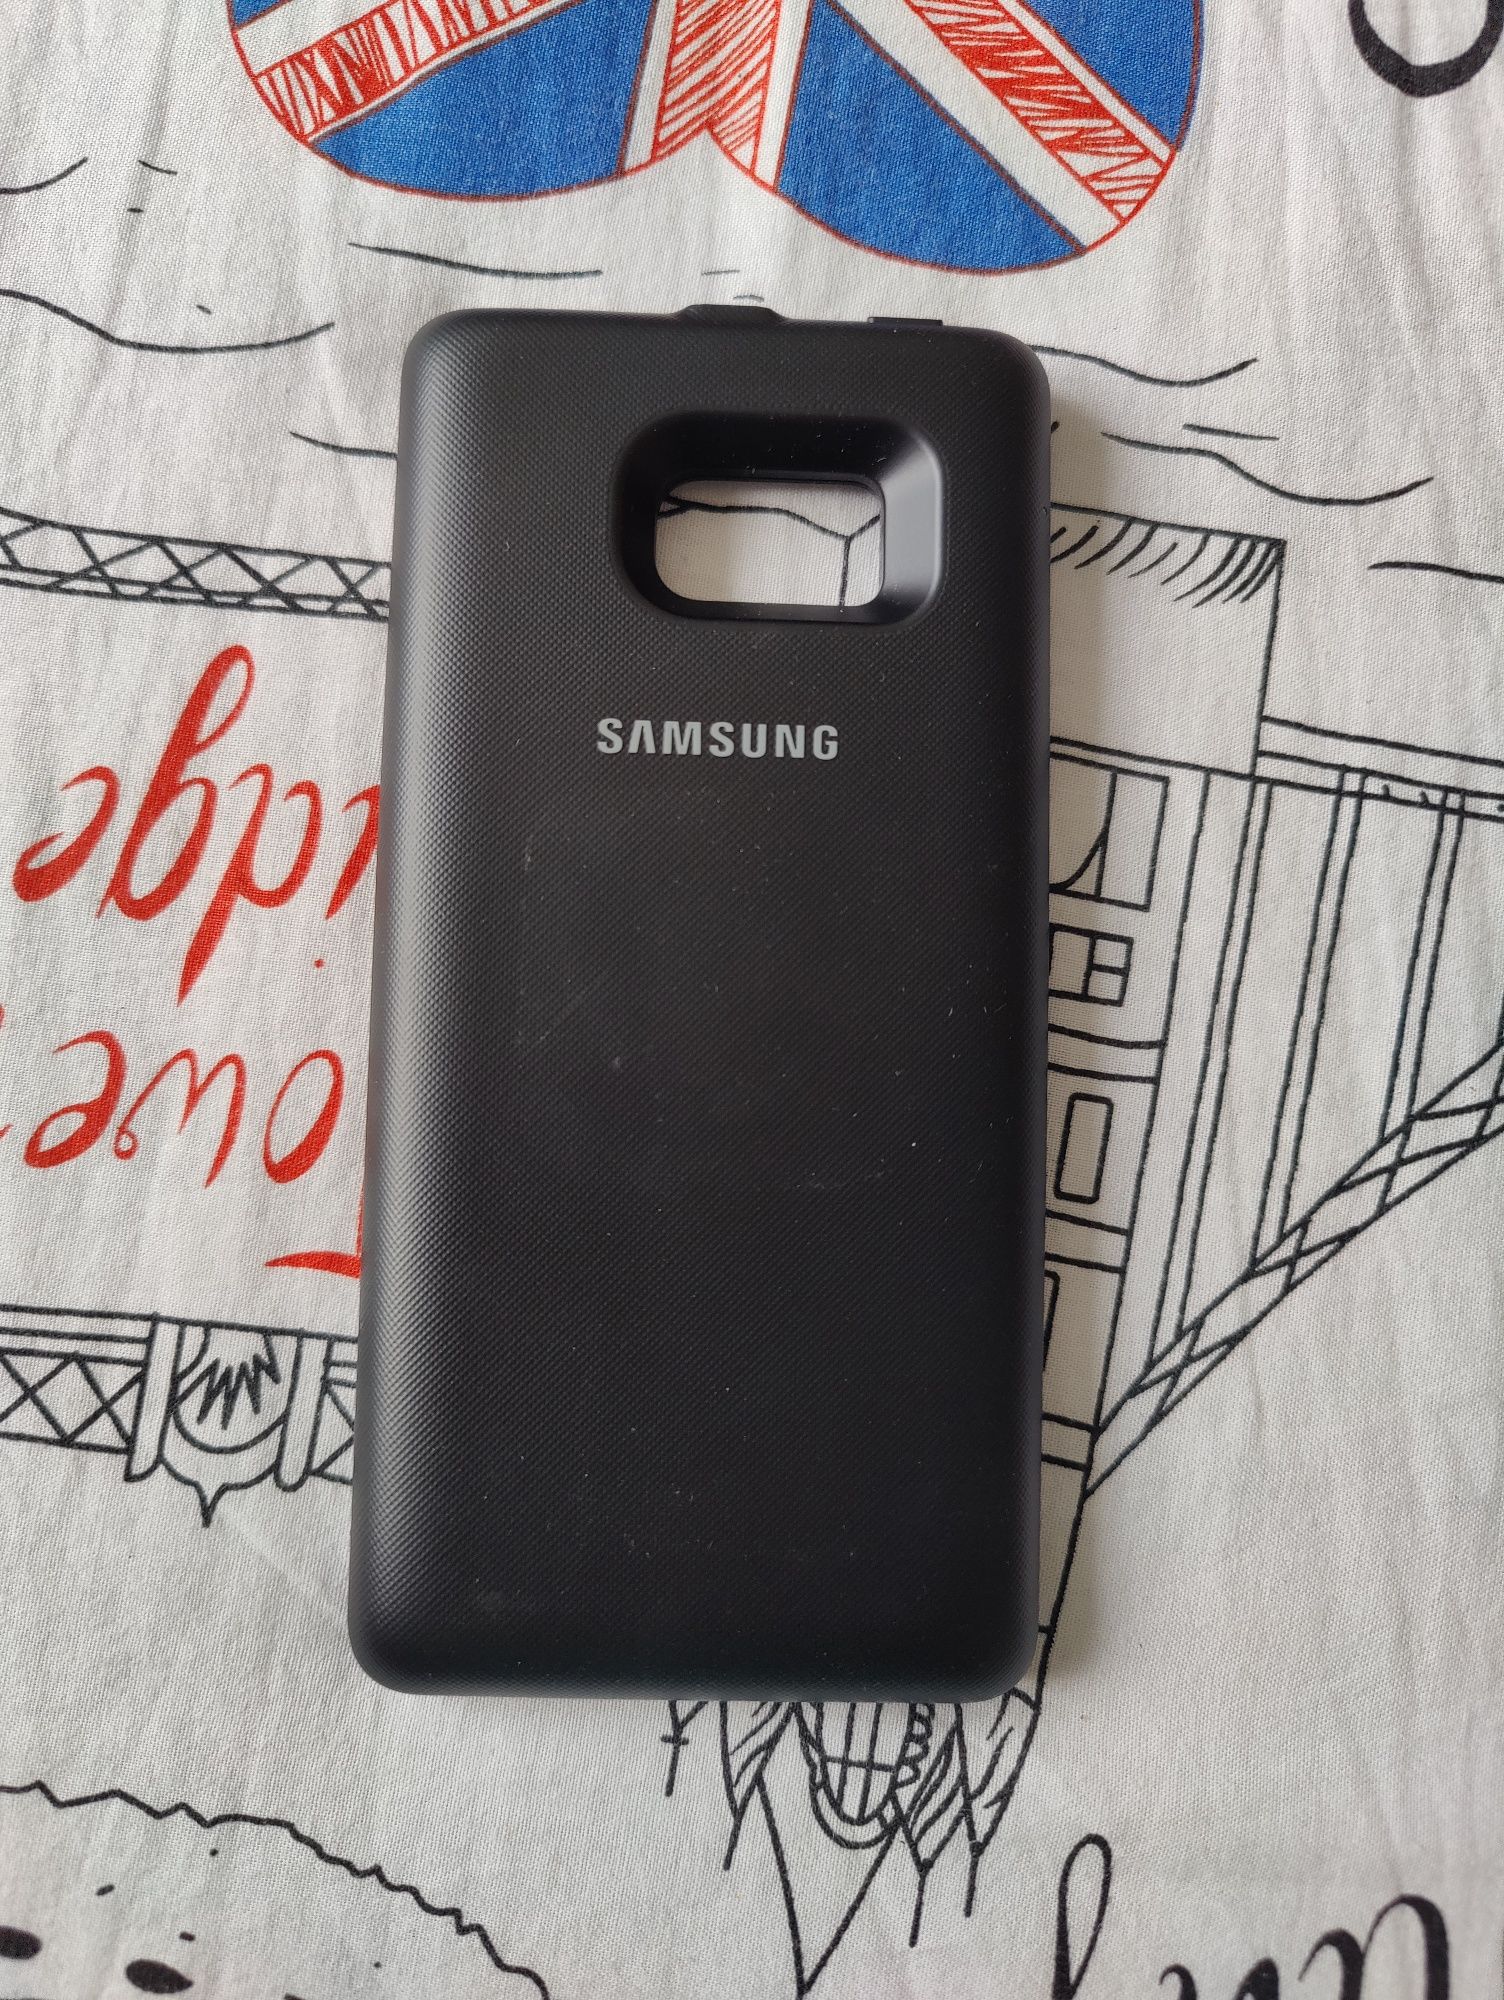 Samsung Note 7 charging case [collector's item]